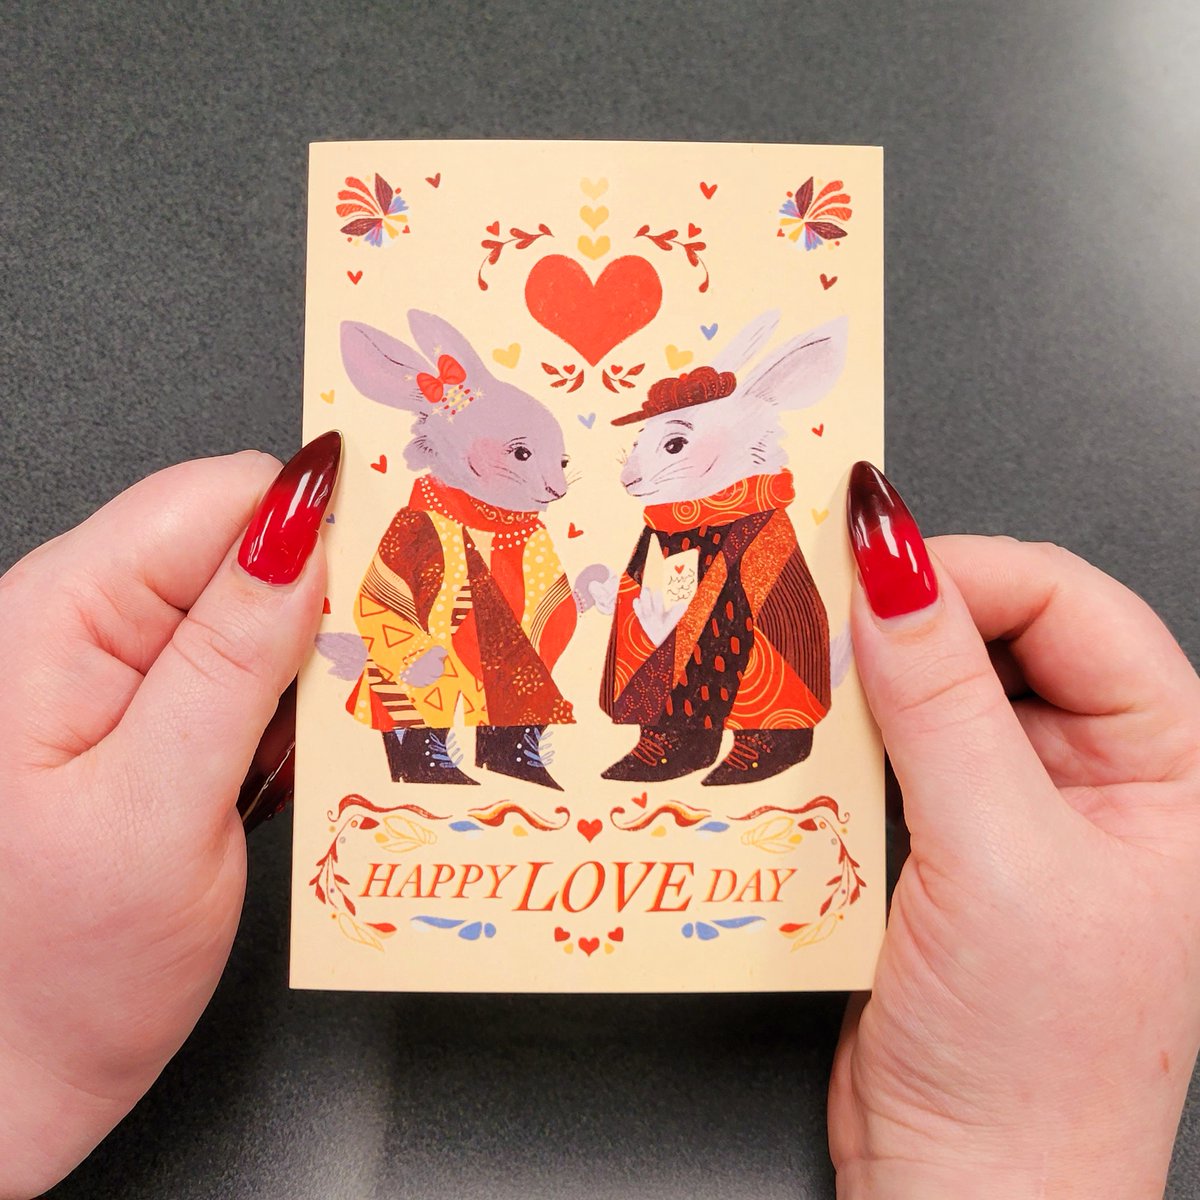 'Hoppy' Valentine's Day! We love printing one-of-a-kind cards. This project was created by one of our staff members. Cute & creative! 💕💗🐇#ConlinsPrint #valentinesday #spreadthelove #loveforprint #behoppy #somebunnylovesyou #cutecards #cardprinting #digitalprinting #colorprints